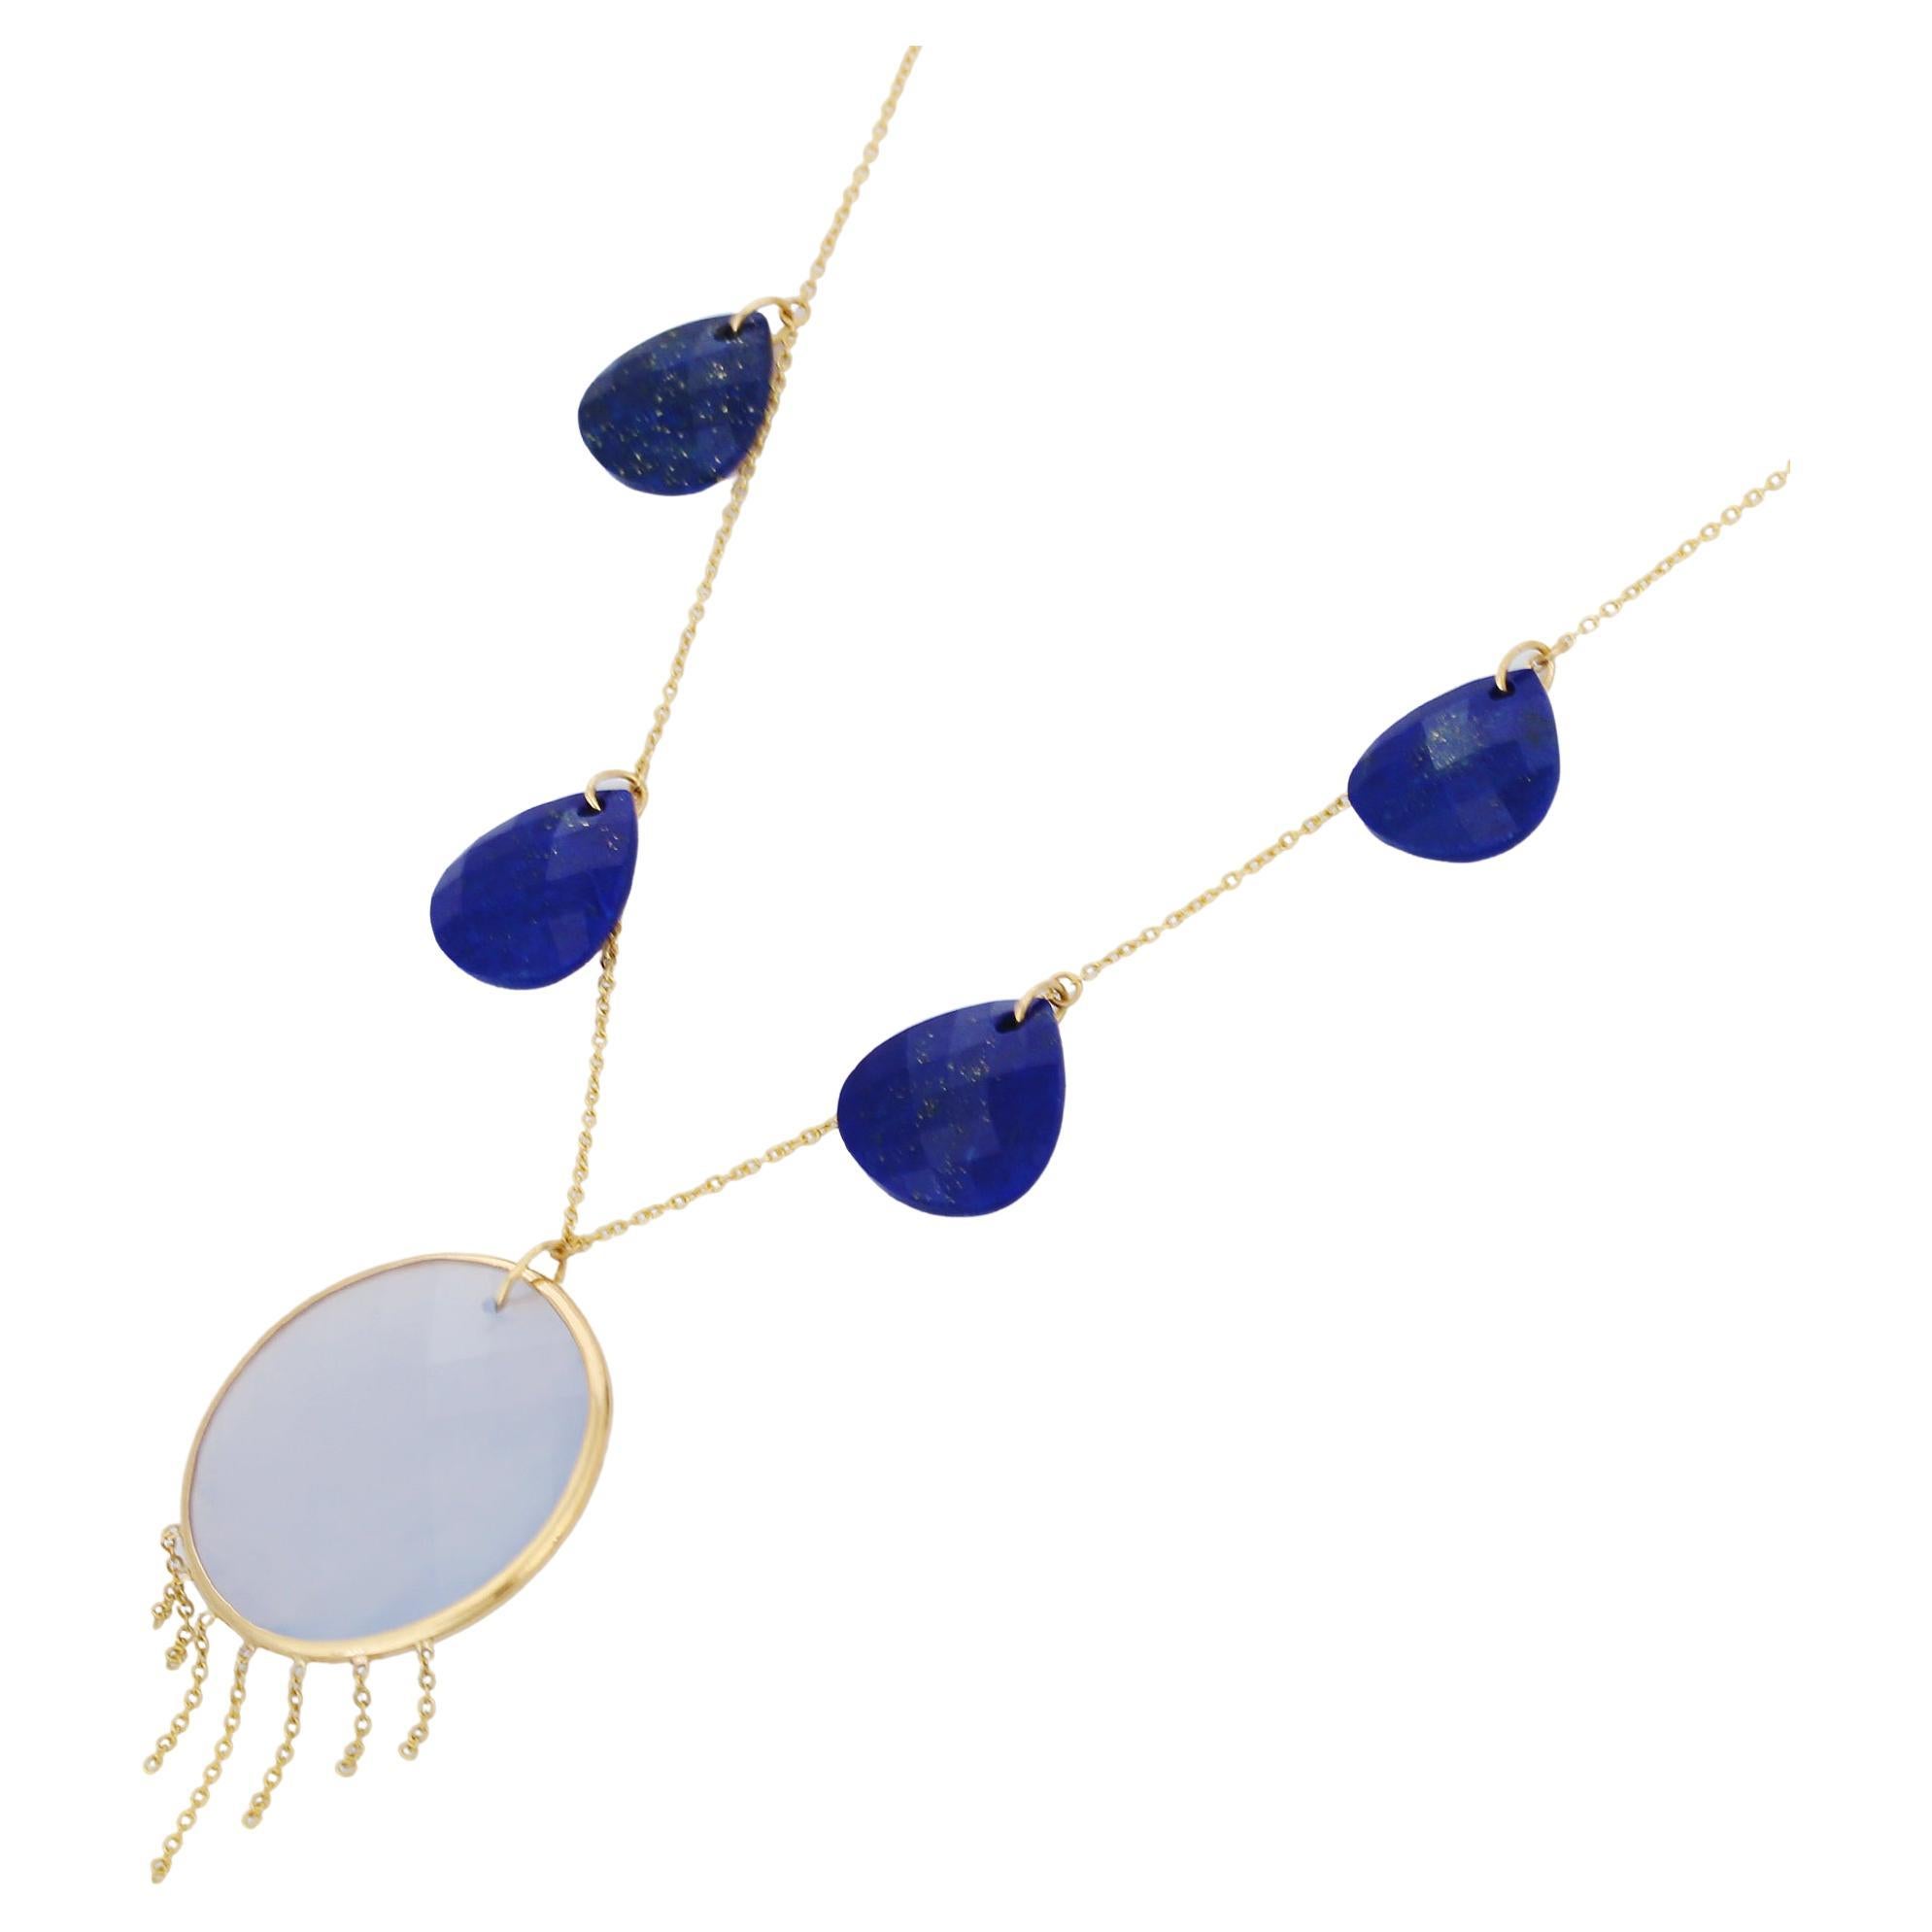 Lapis and Chalcedony Pendant Necklace in 18K Yellow Gold